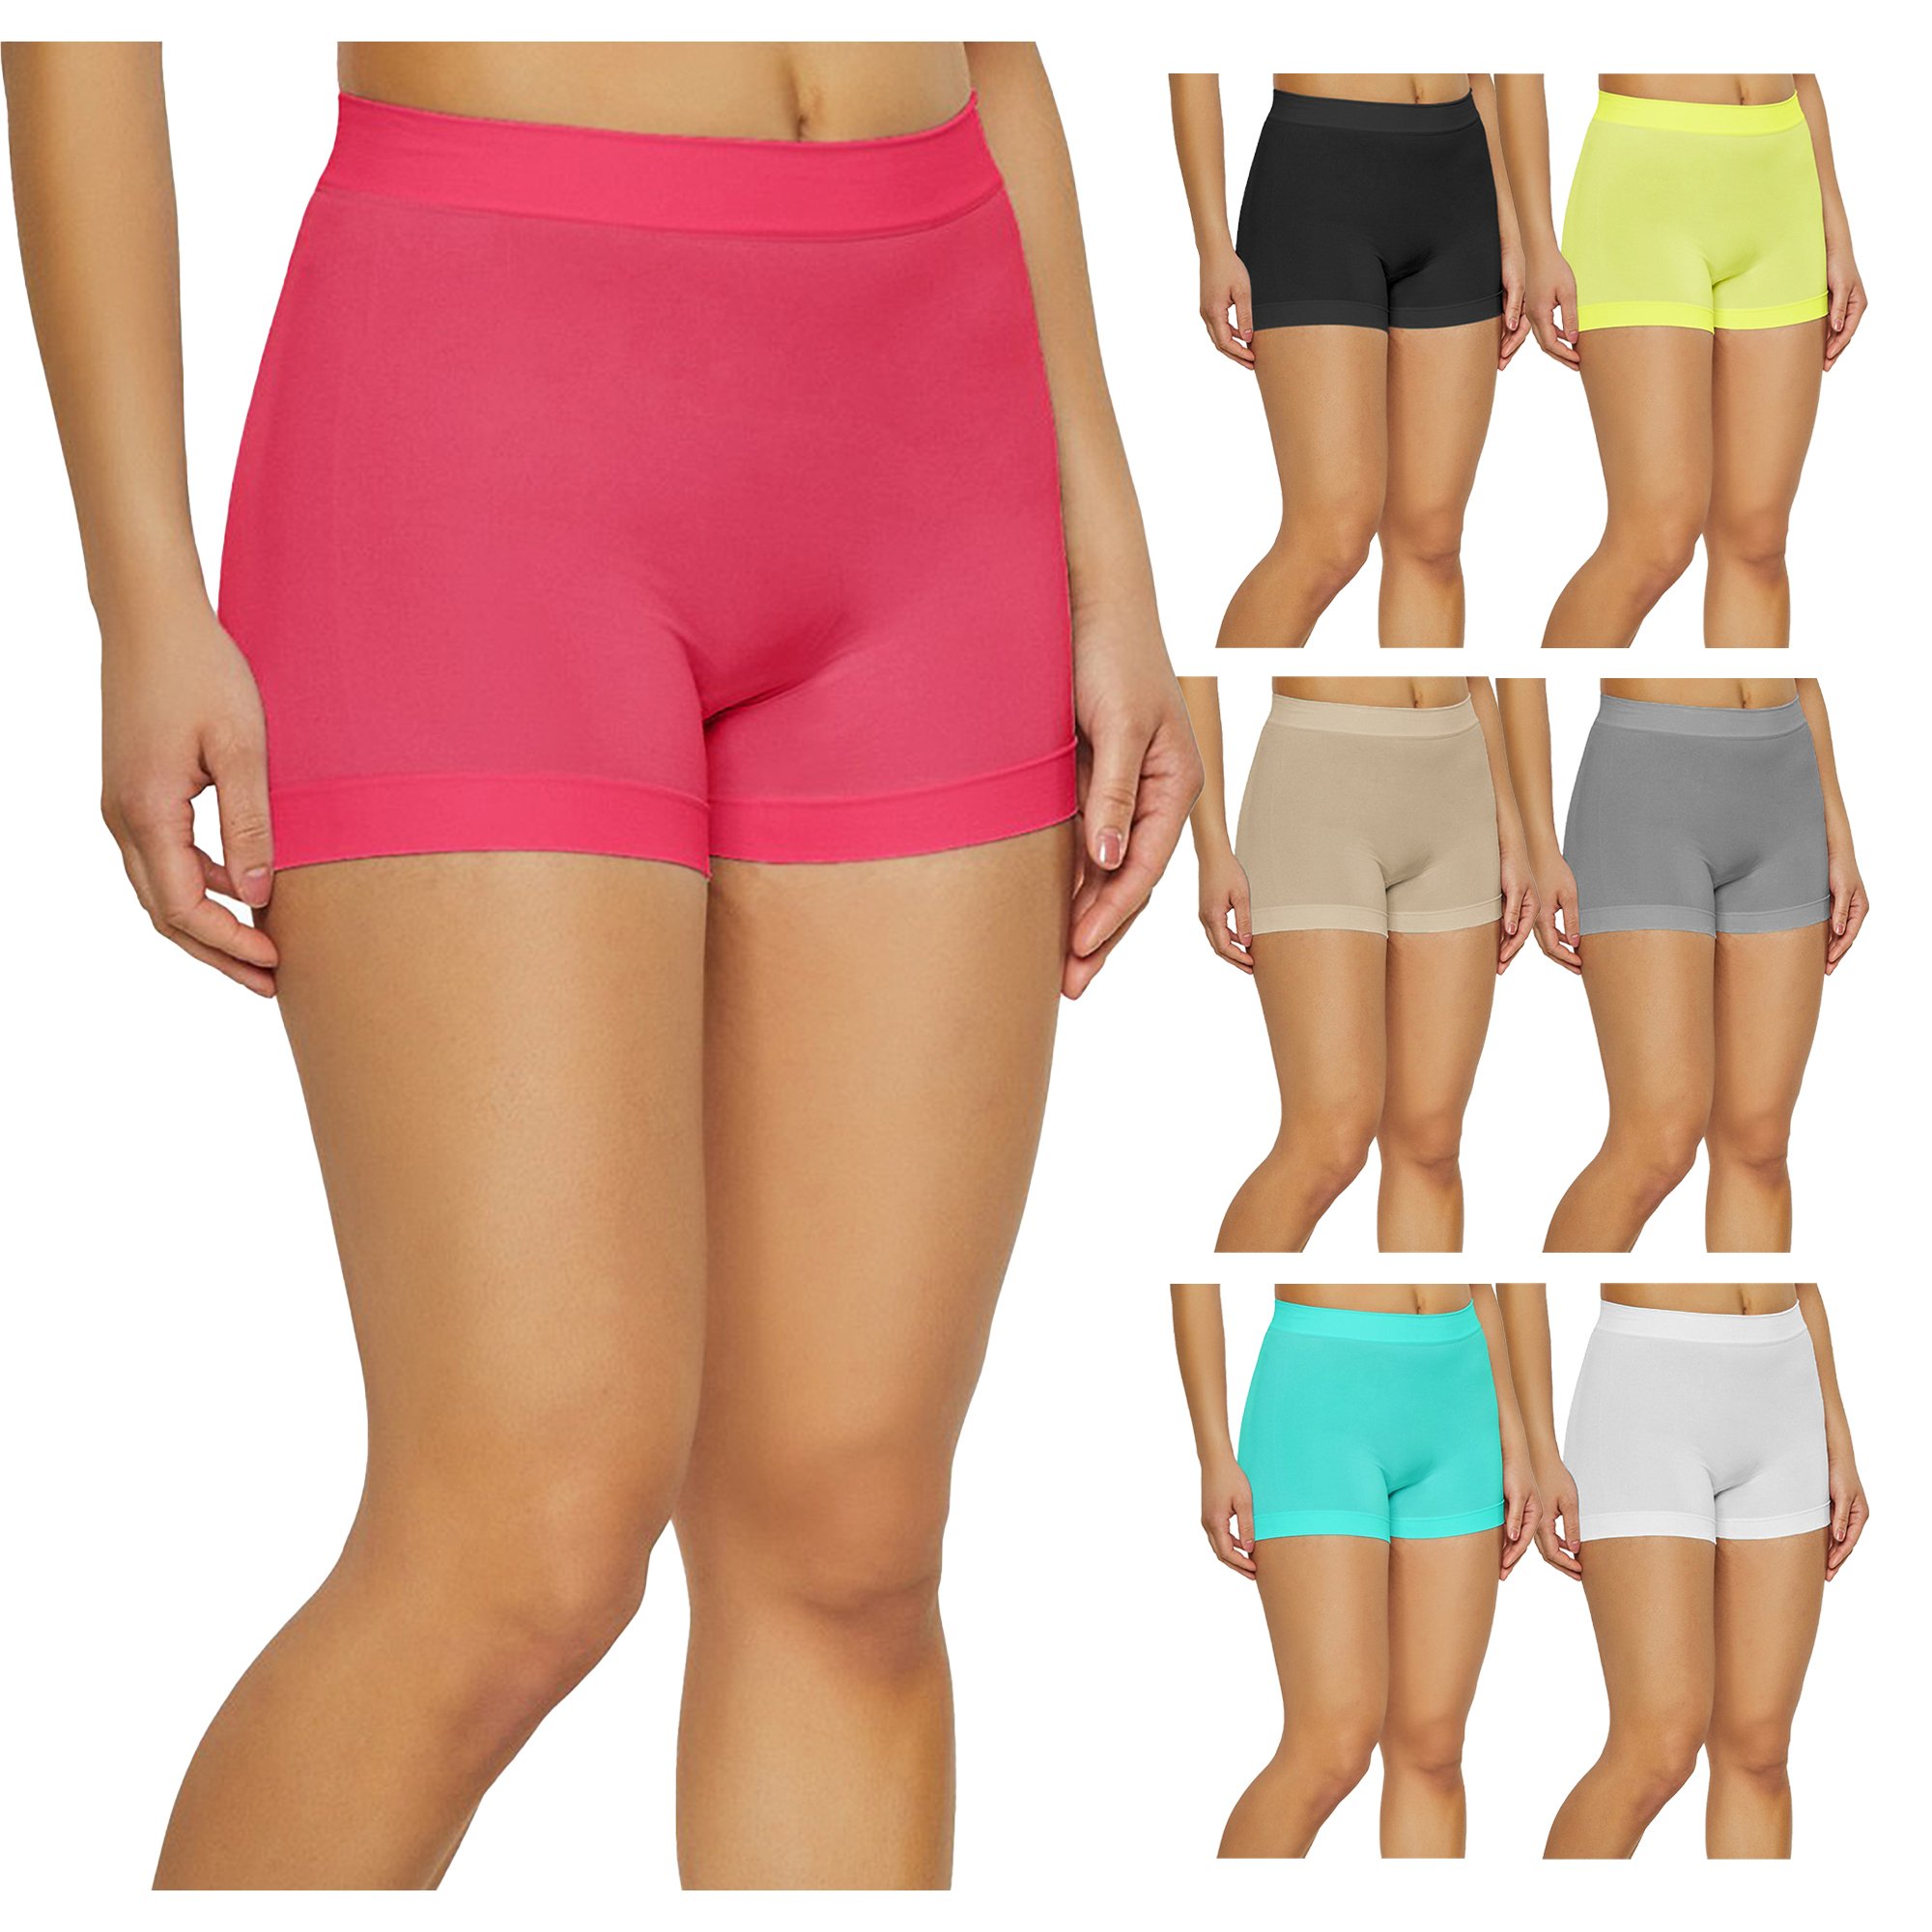 12-Pack Women's High Waisted Biker Bottom Shorts For Yoga Gym Running Ladies Pants - CORAL, XS